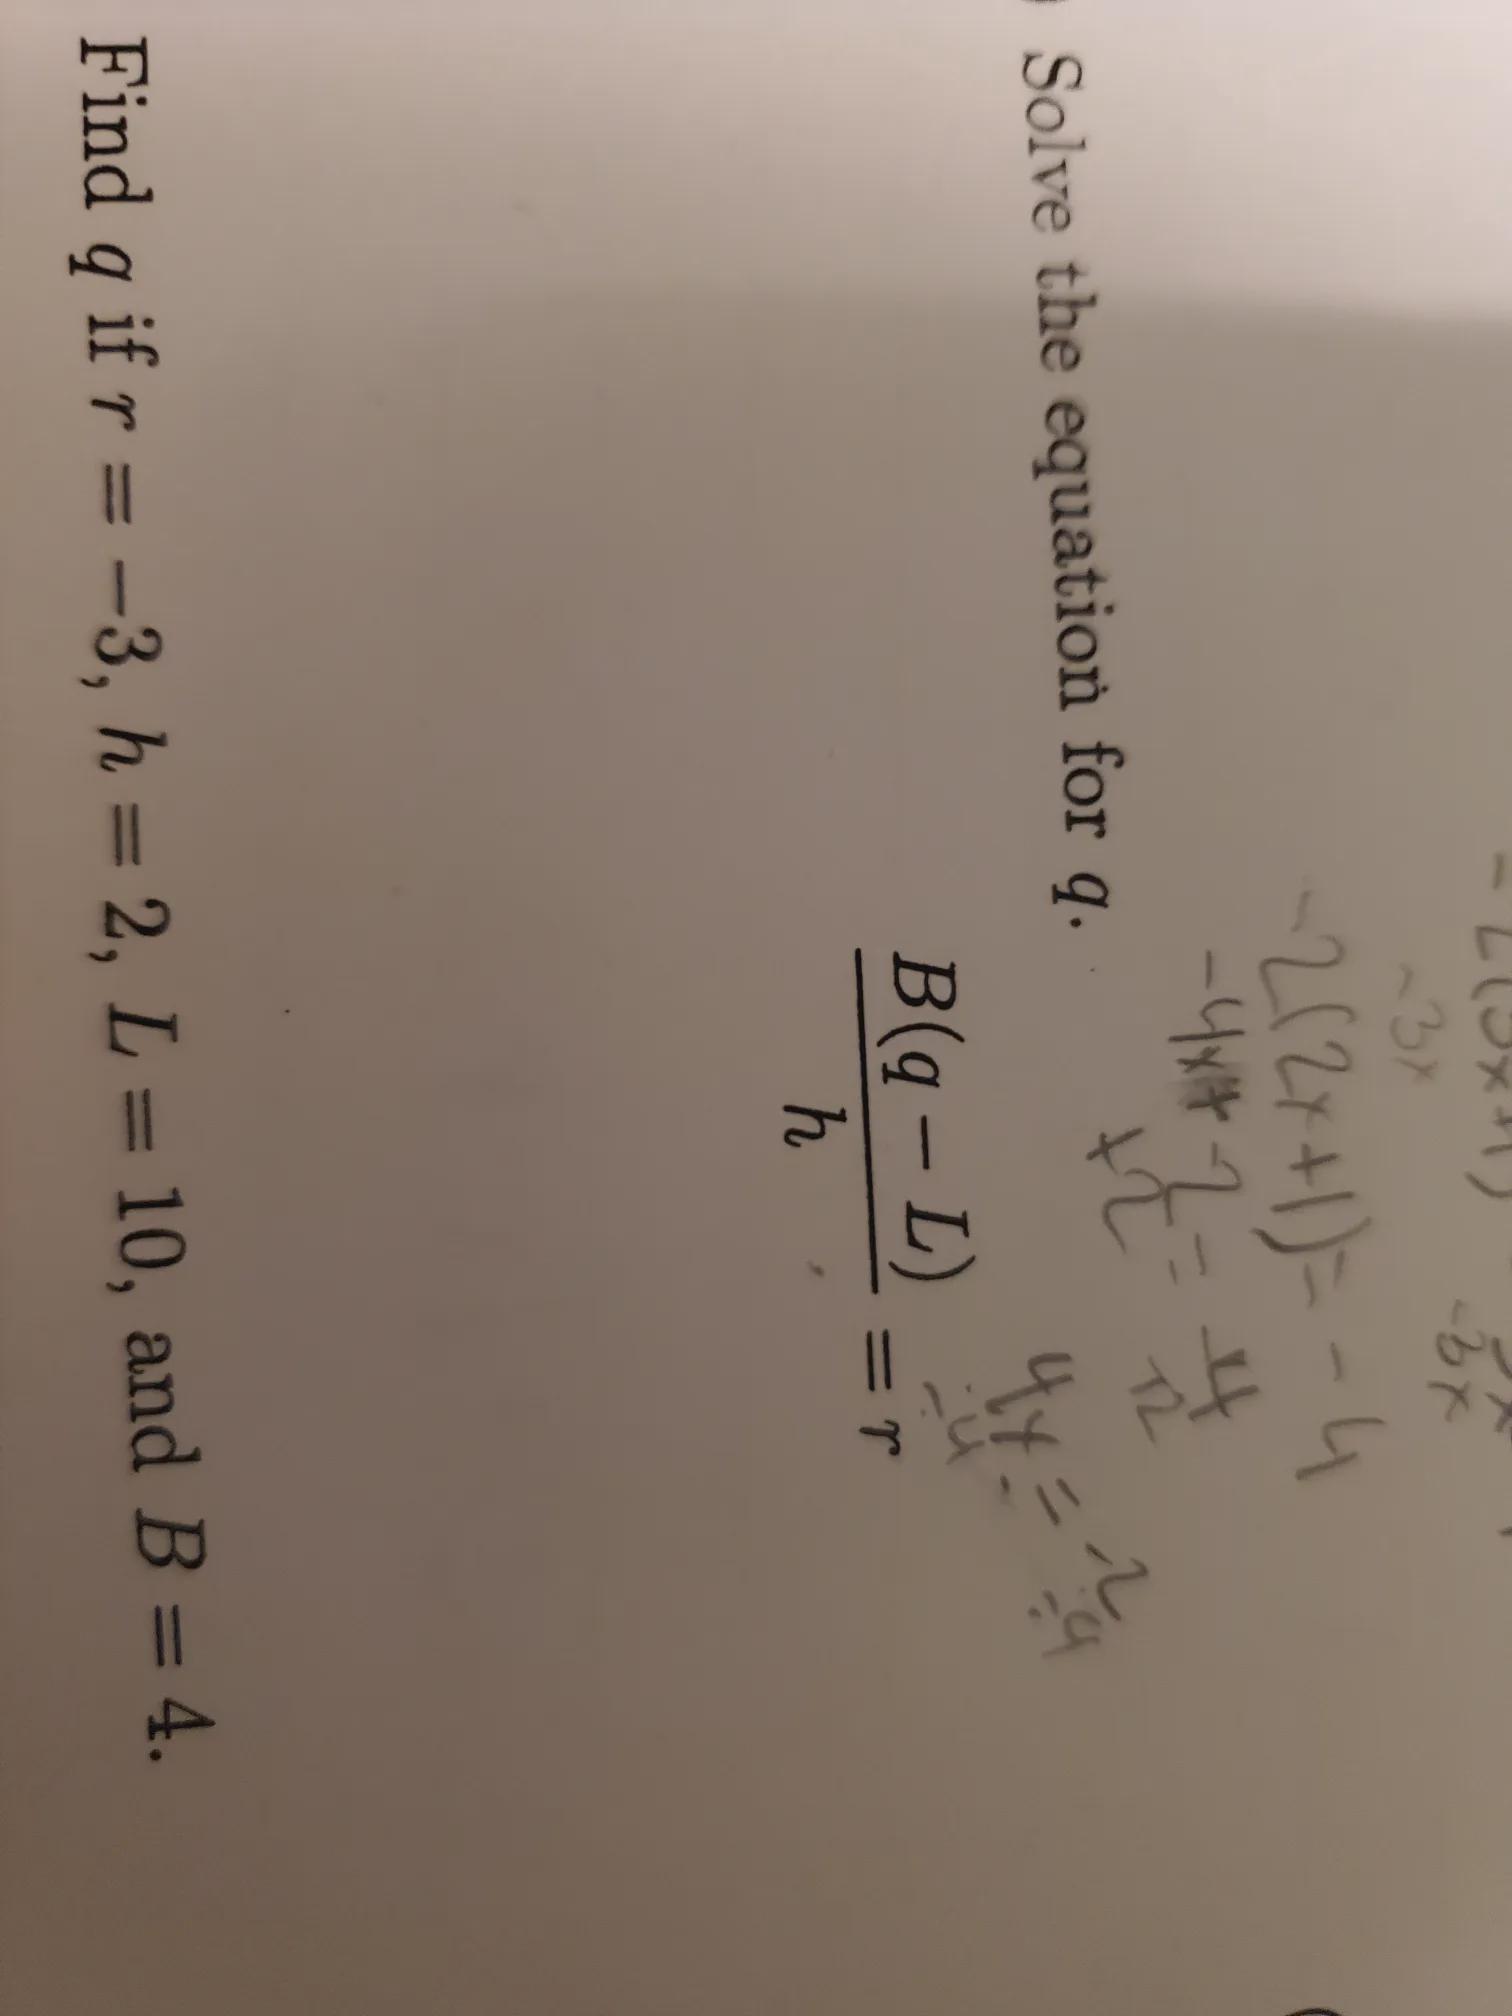 B(q-L)--------- =3. Its All Divided By H But I Don't. Hunderstand How To Solve For Q 